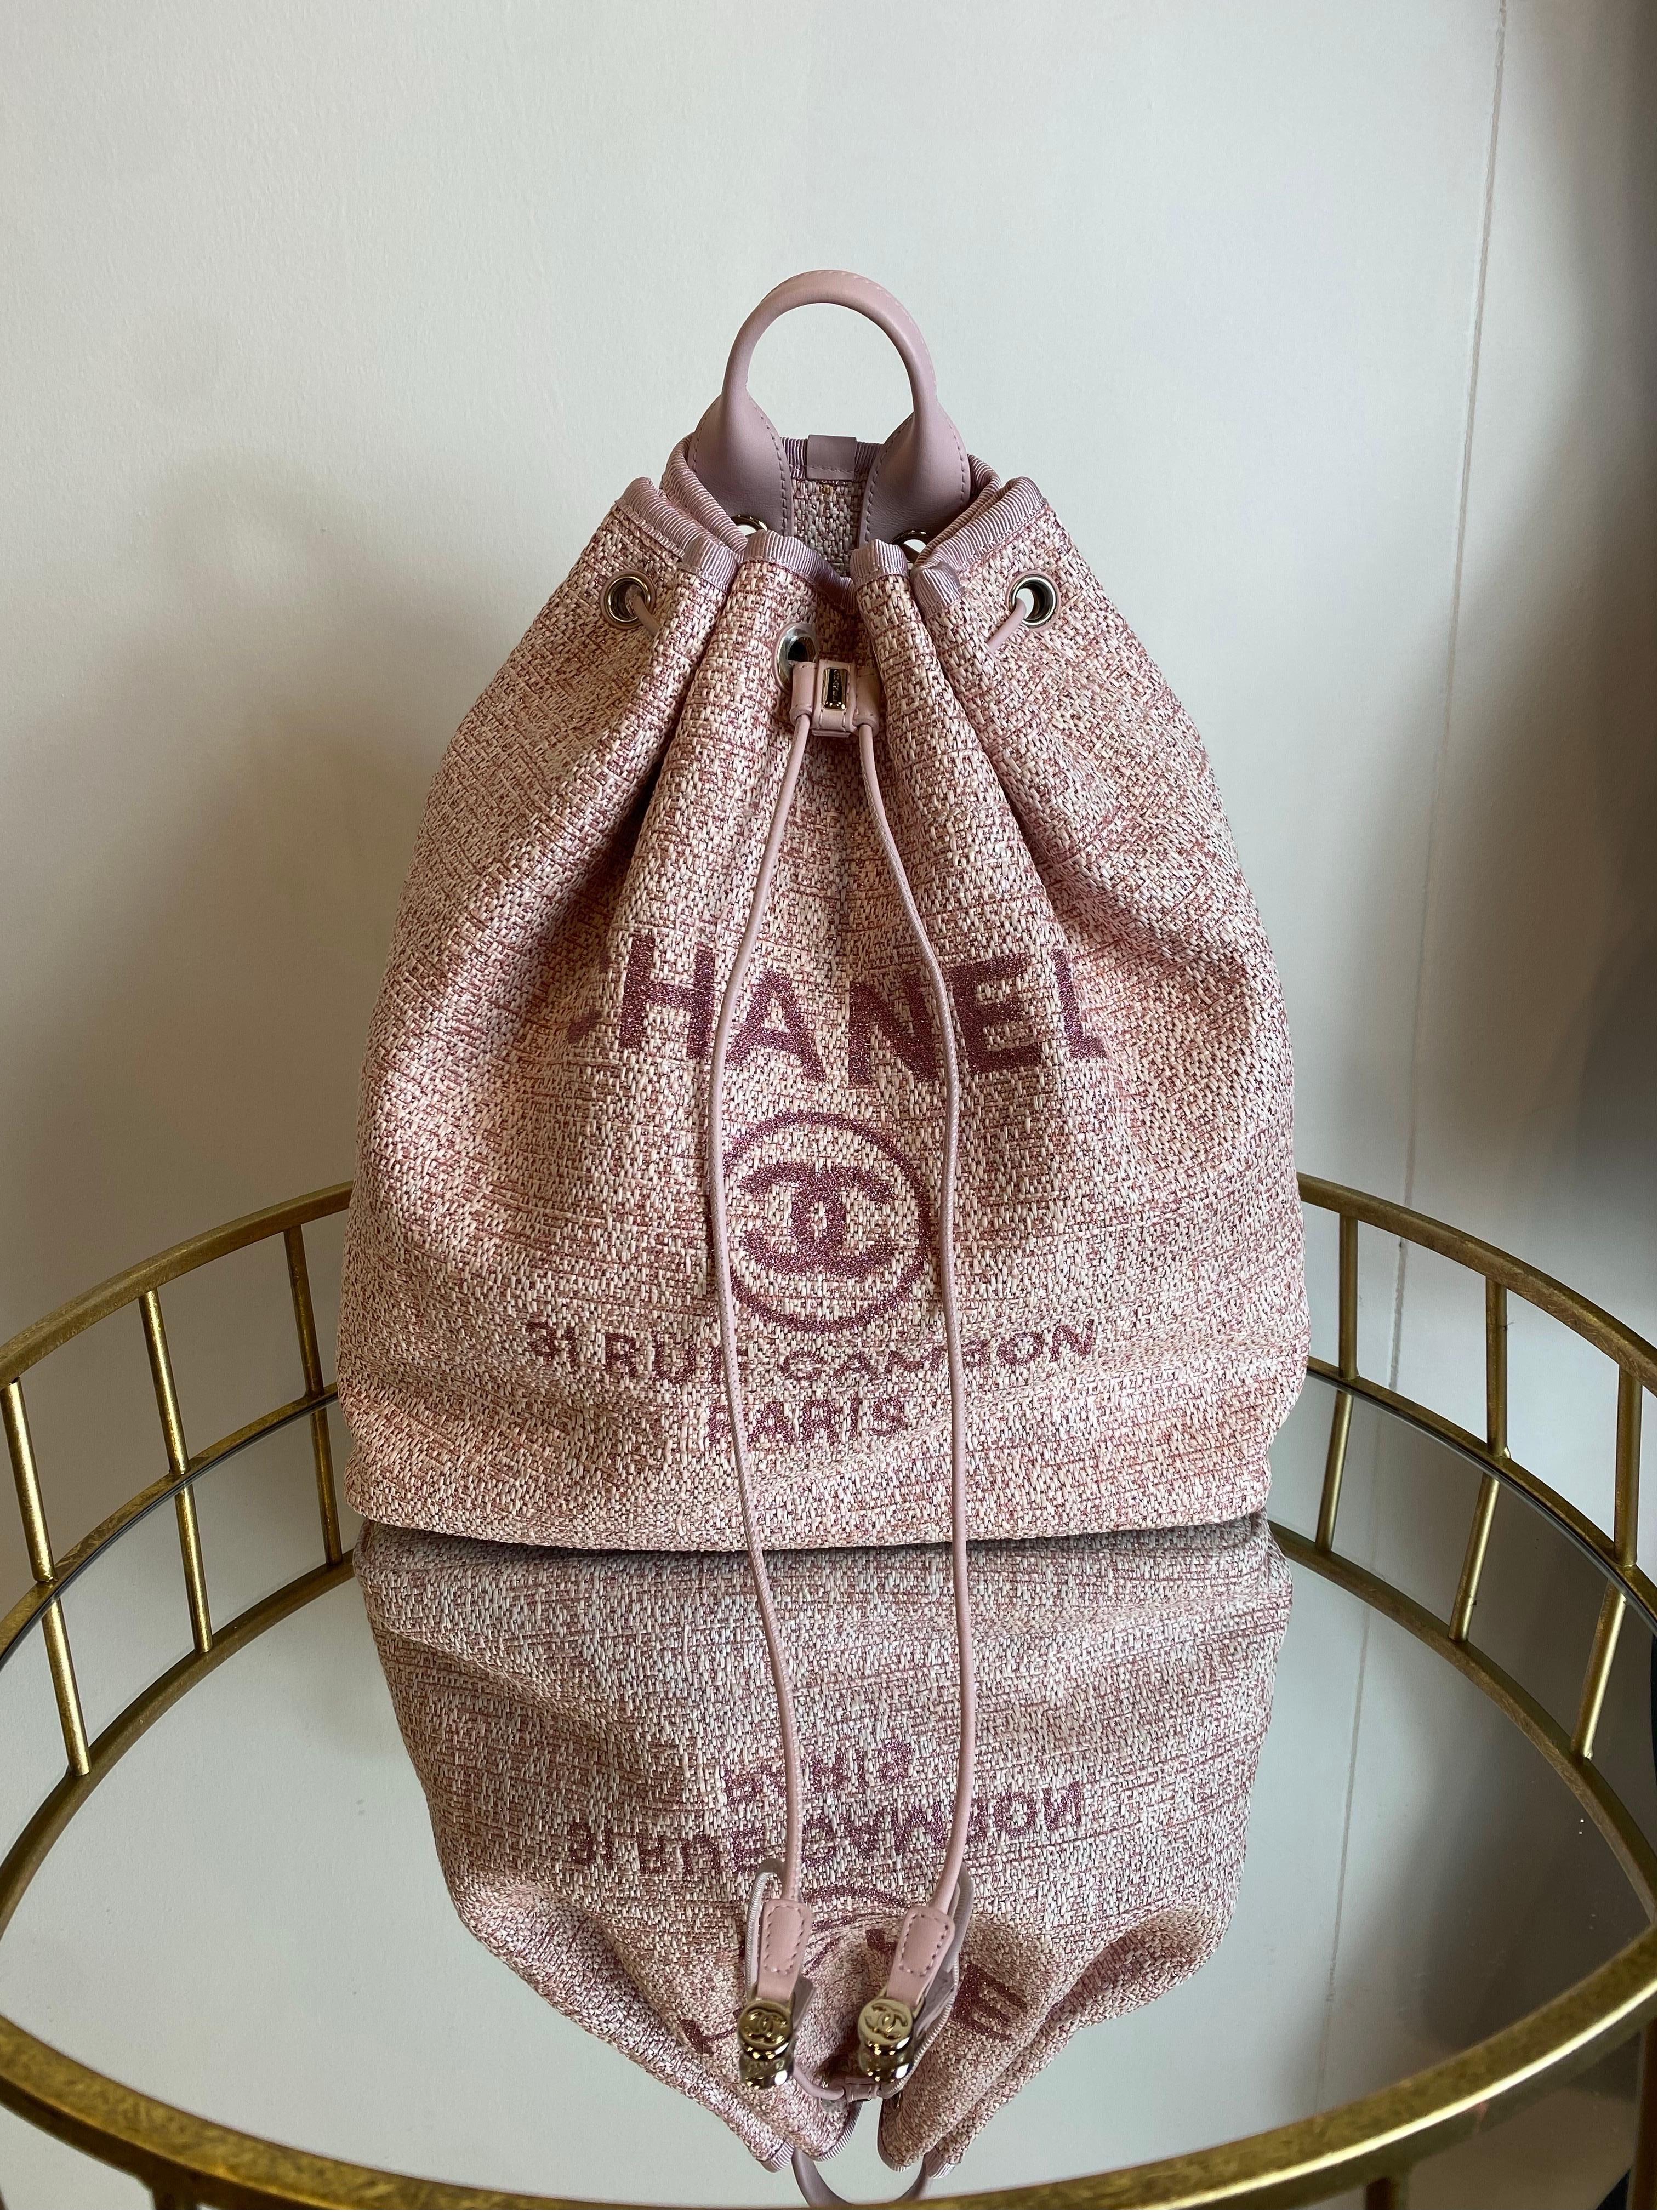 Chanel Deauville pink tweed Backpack  In Excellent Condition For Sale In Carnate, IT